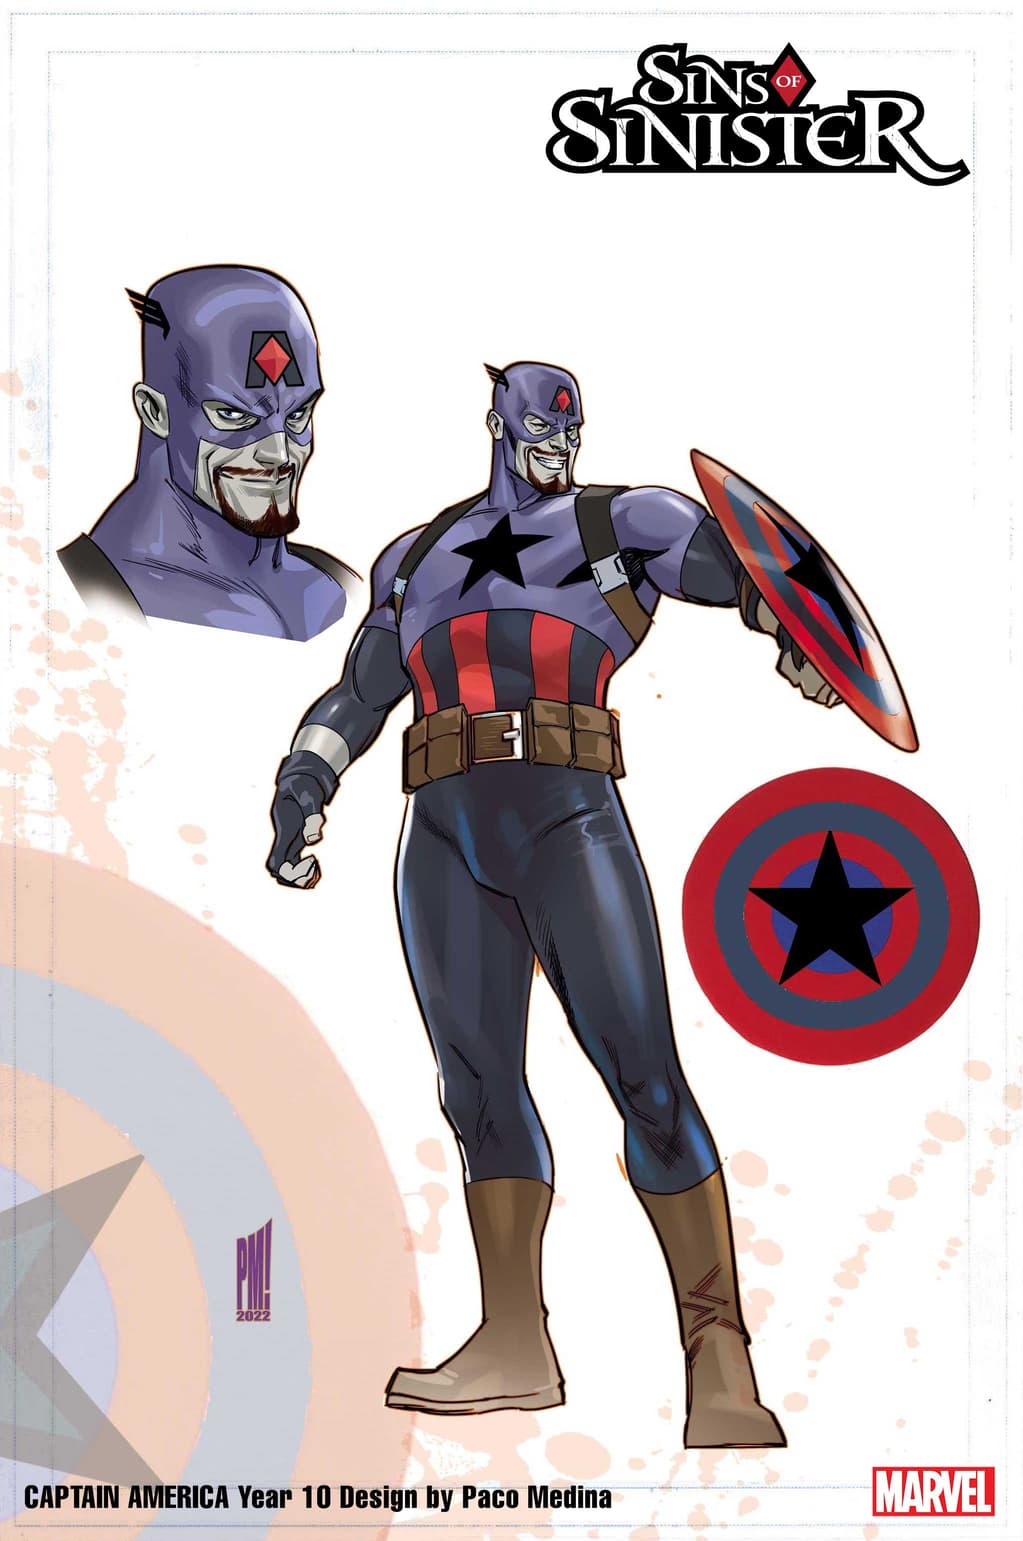 Sins of Sinister Year 10 Captain America Design